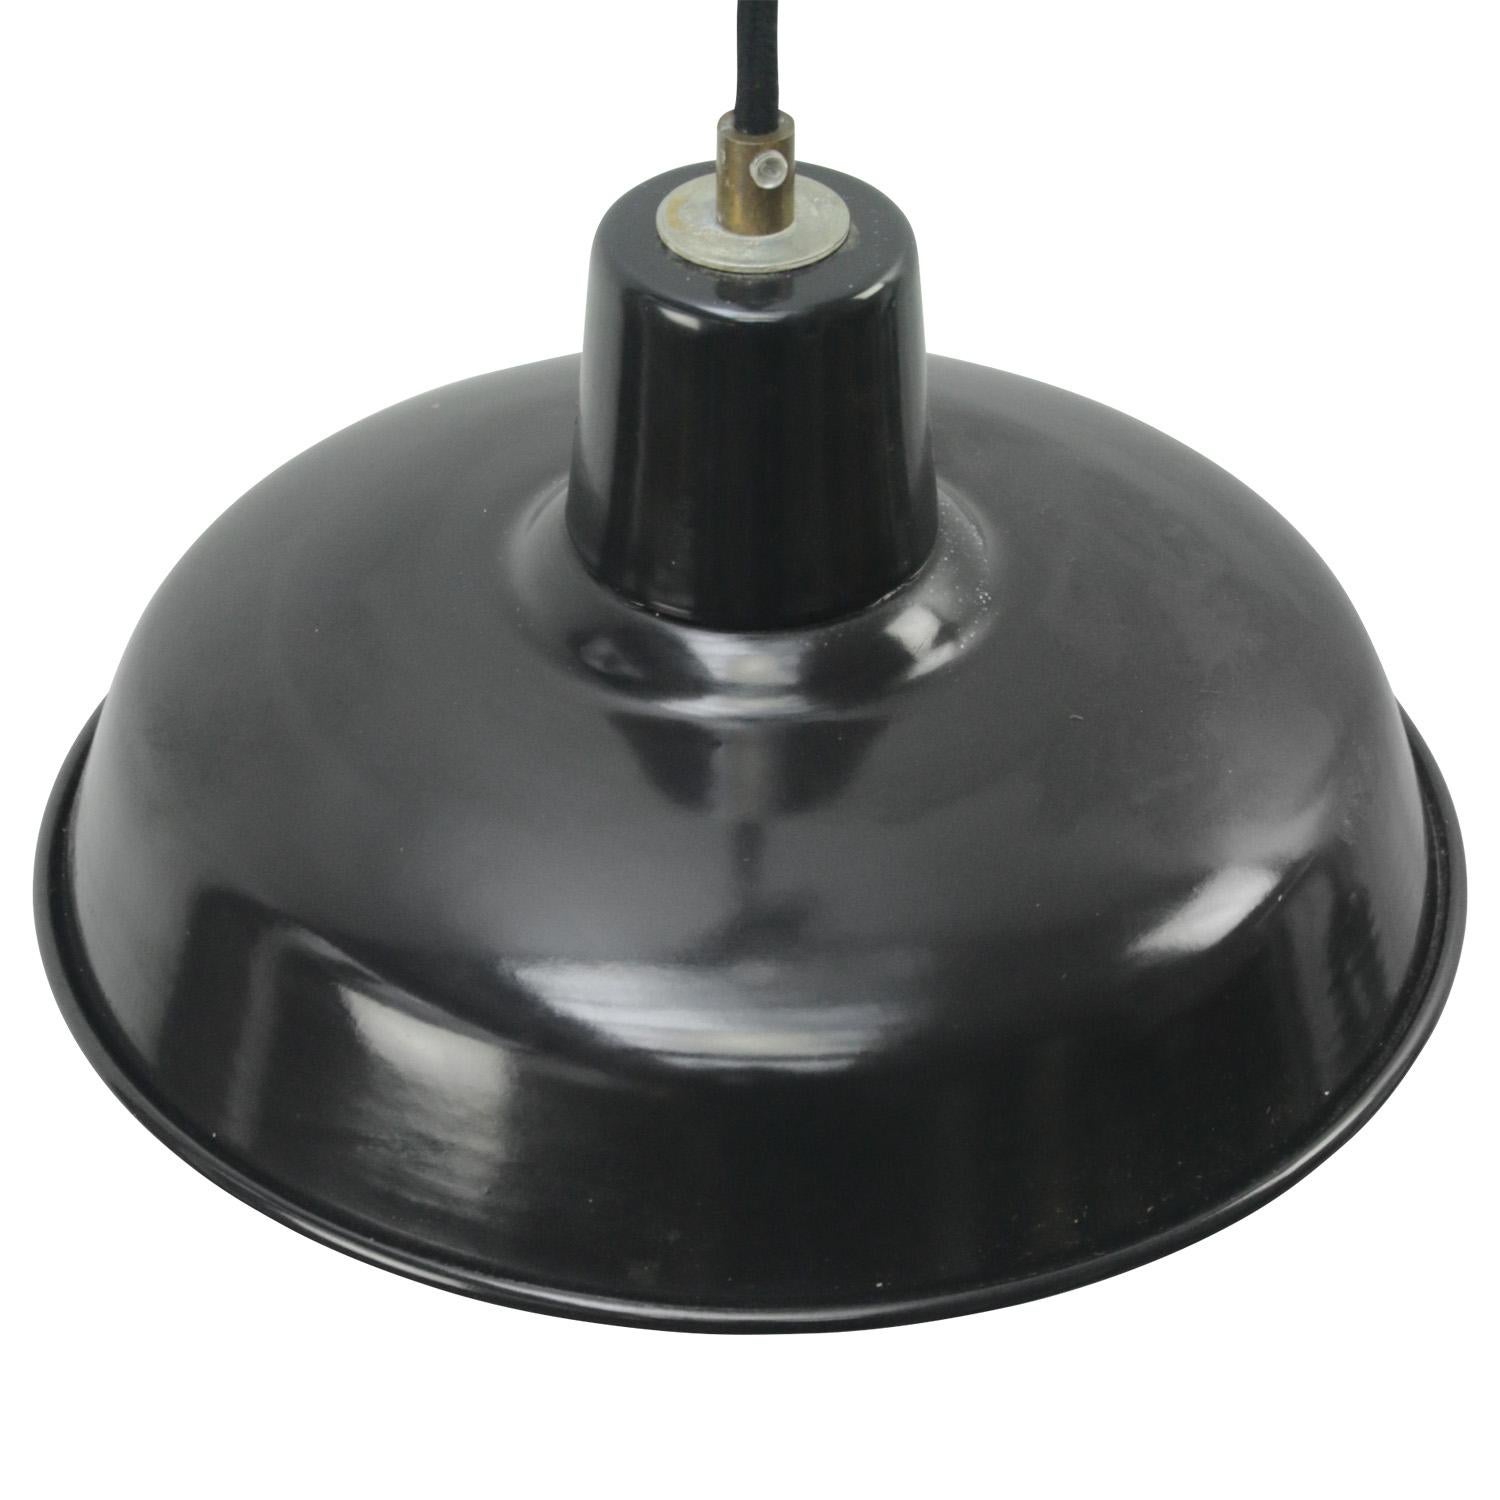 French black enamel Industrial pendant lamp.
Used in warehouses and factories in France.

Weight: 1.00 kg / 2.2 lb

Priced per individual item. All lamps have been made suitable by international standards for incandescent light bulbs,